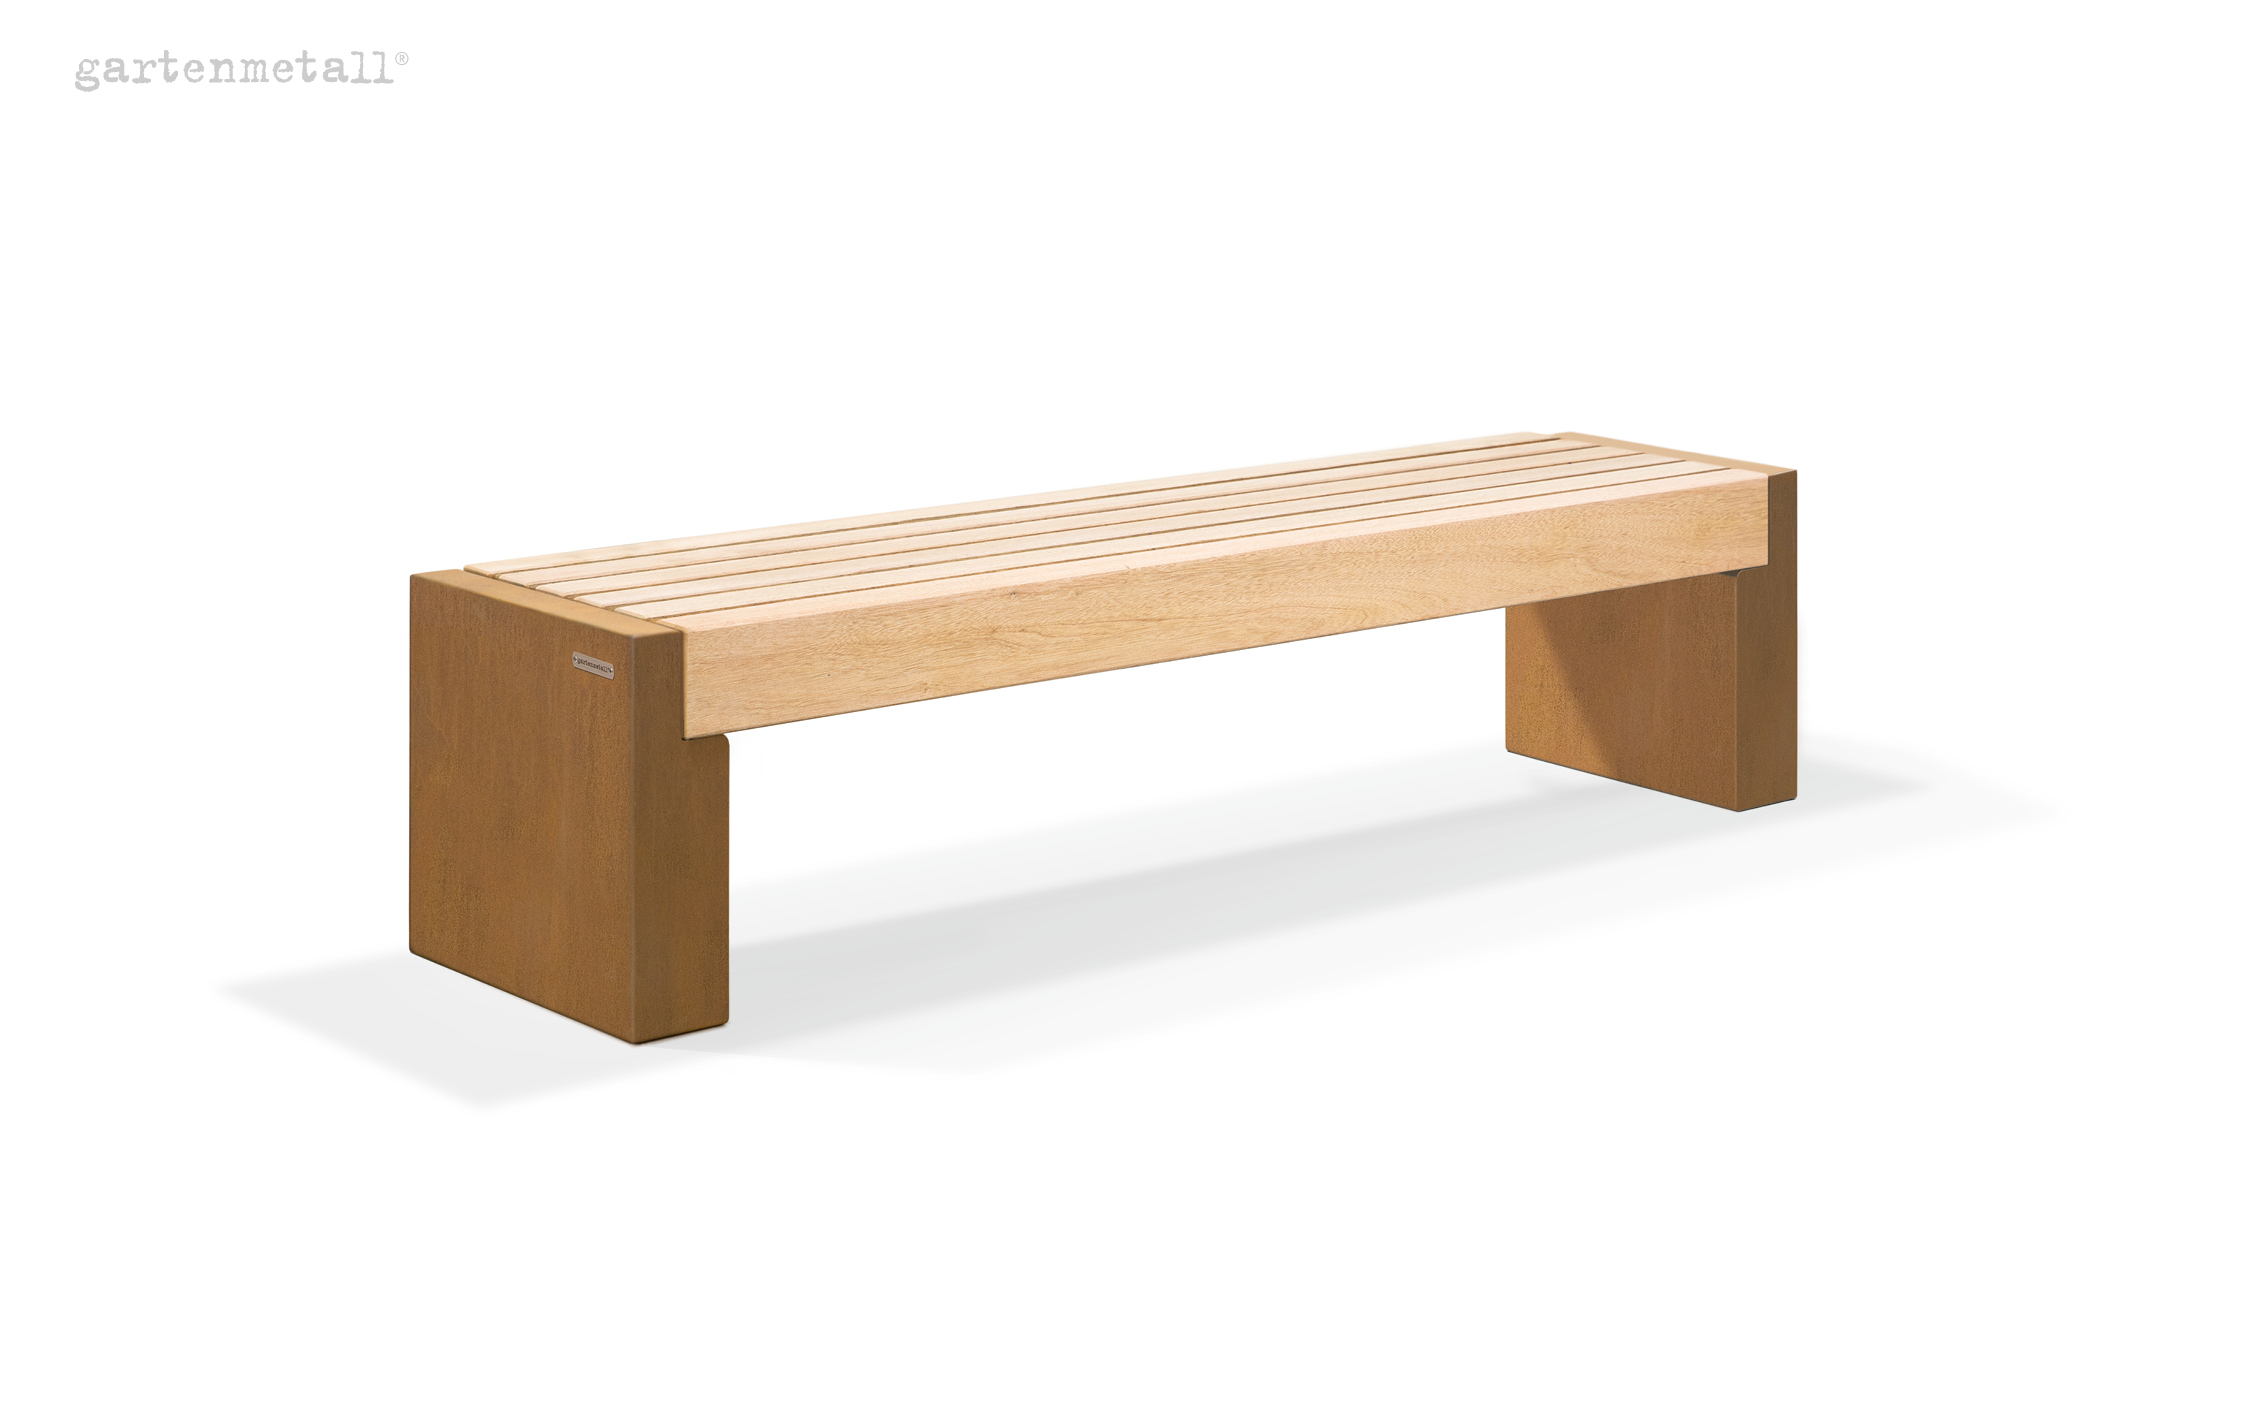 Bench type EMDEN 2.0 m with seat support hardwood